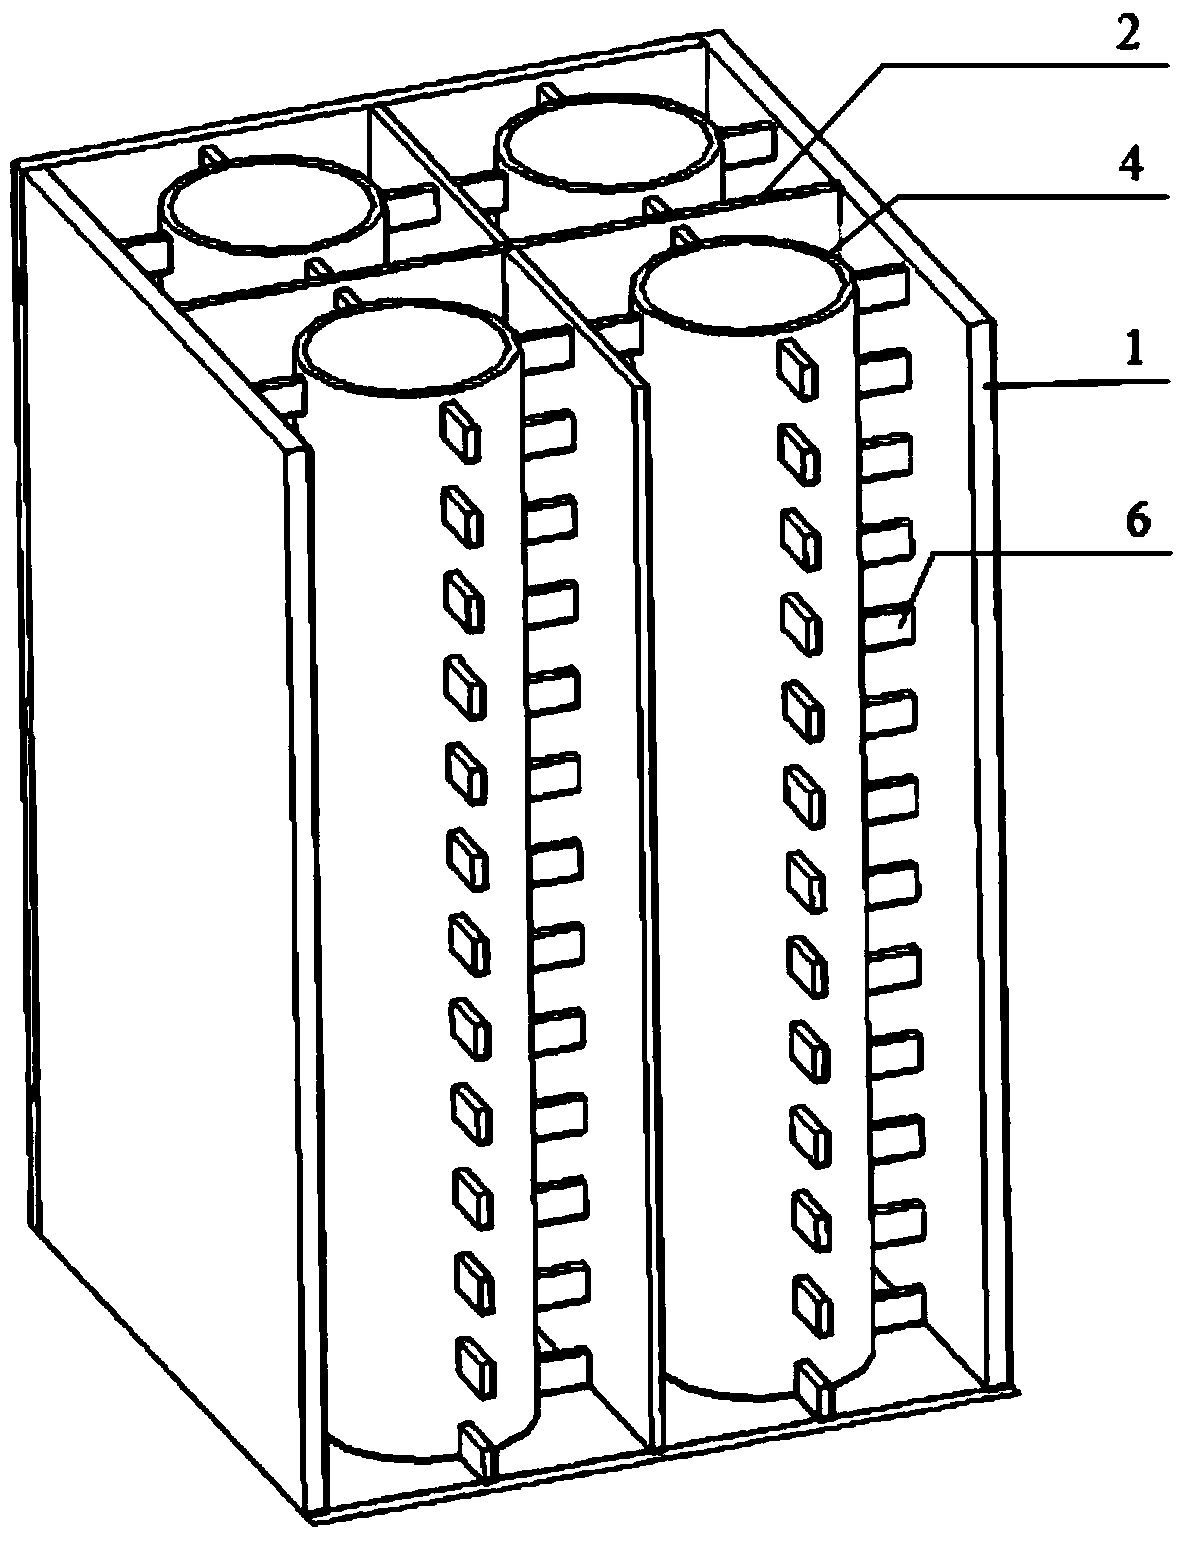 Combined column formed by embedding round steel tubes filled with recycled concrete in multiple-cavity steel pipe filled with concrete and provided with batten plates